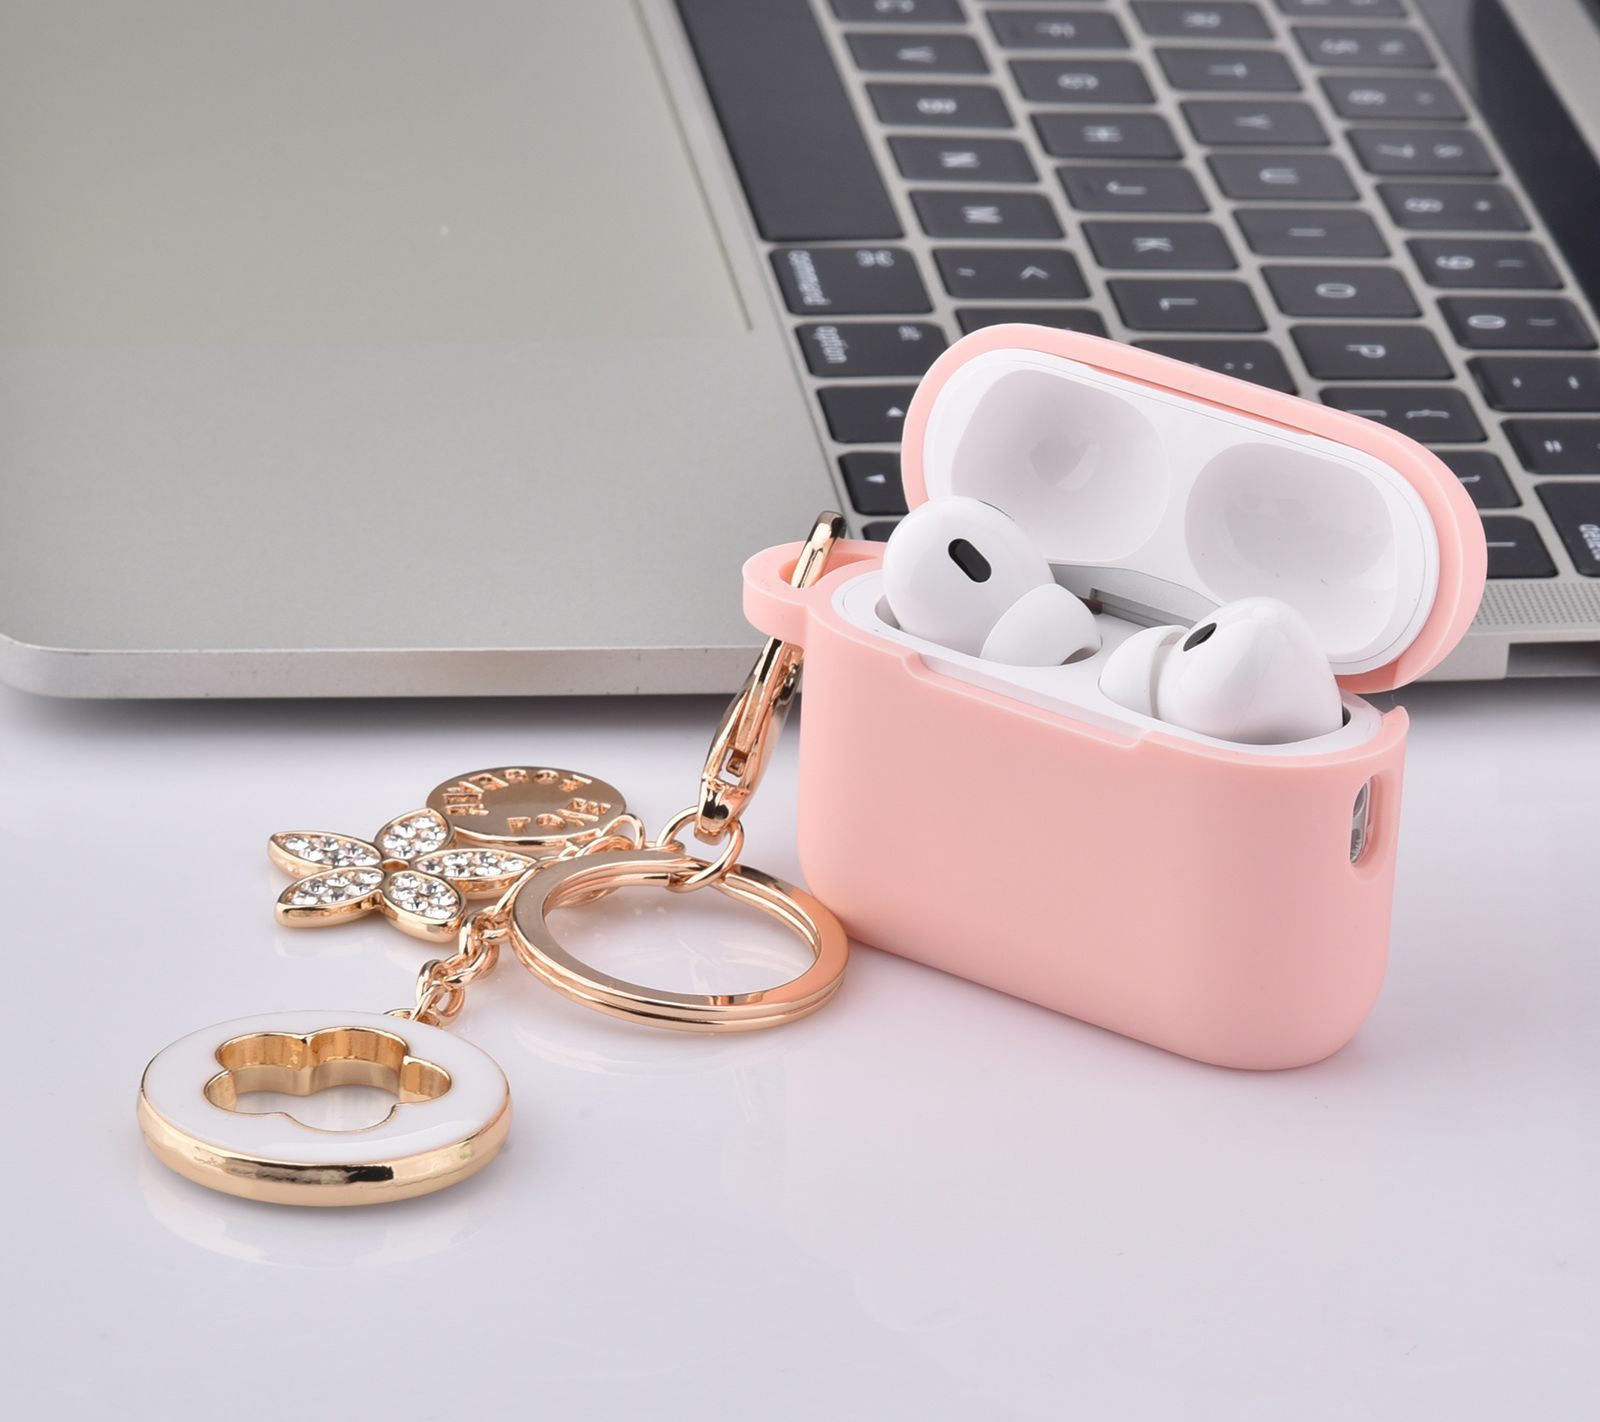 Worryfree Gadgets Case Compatible With Airpod Pro 2 Protective Cover With  Keychain - Bling Black : Target